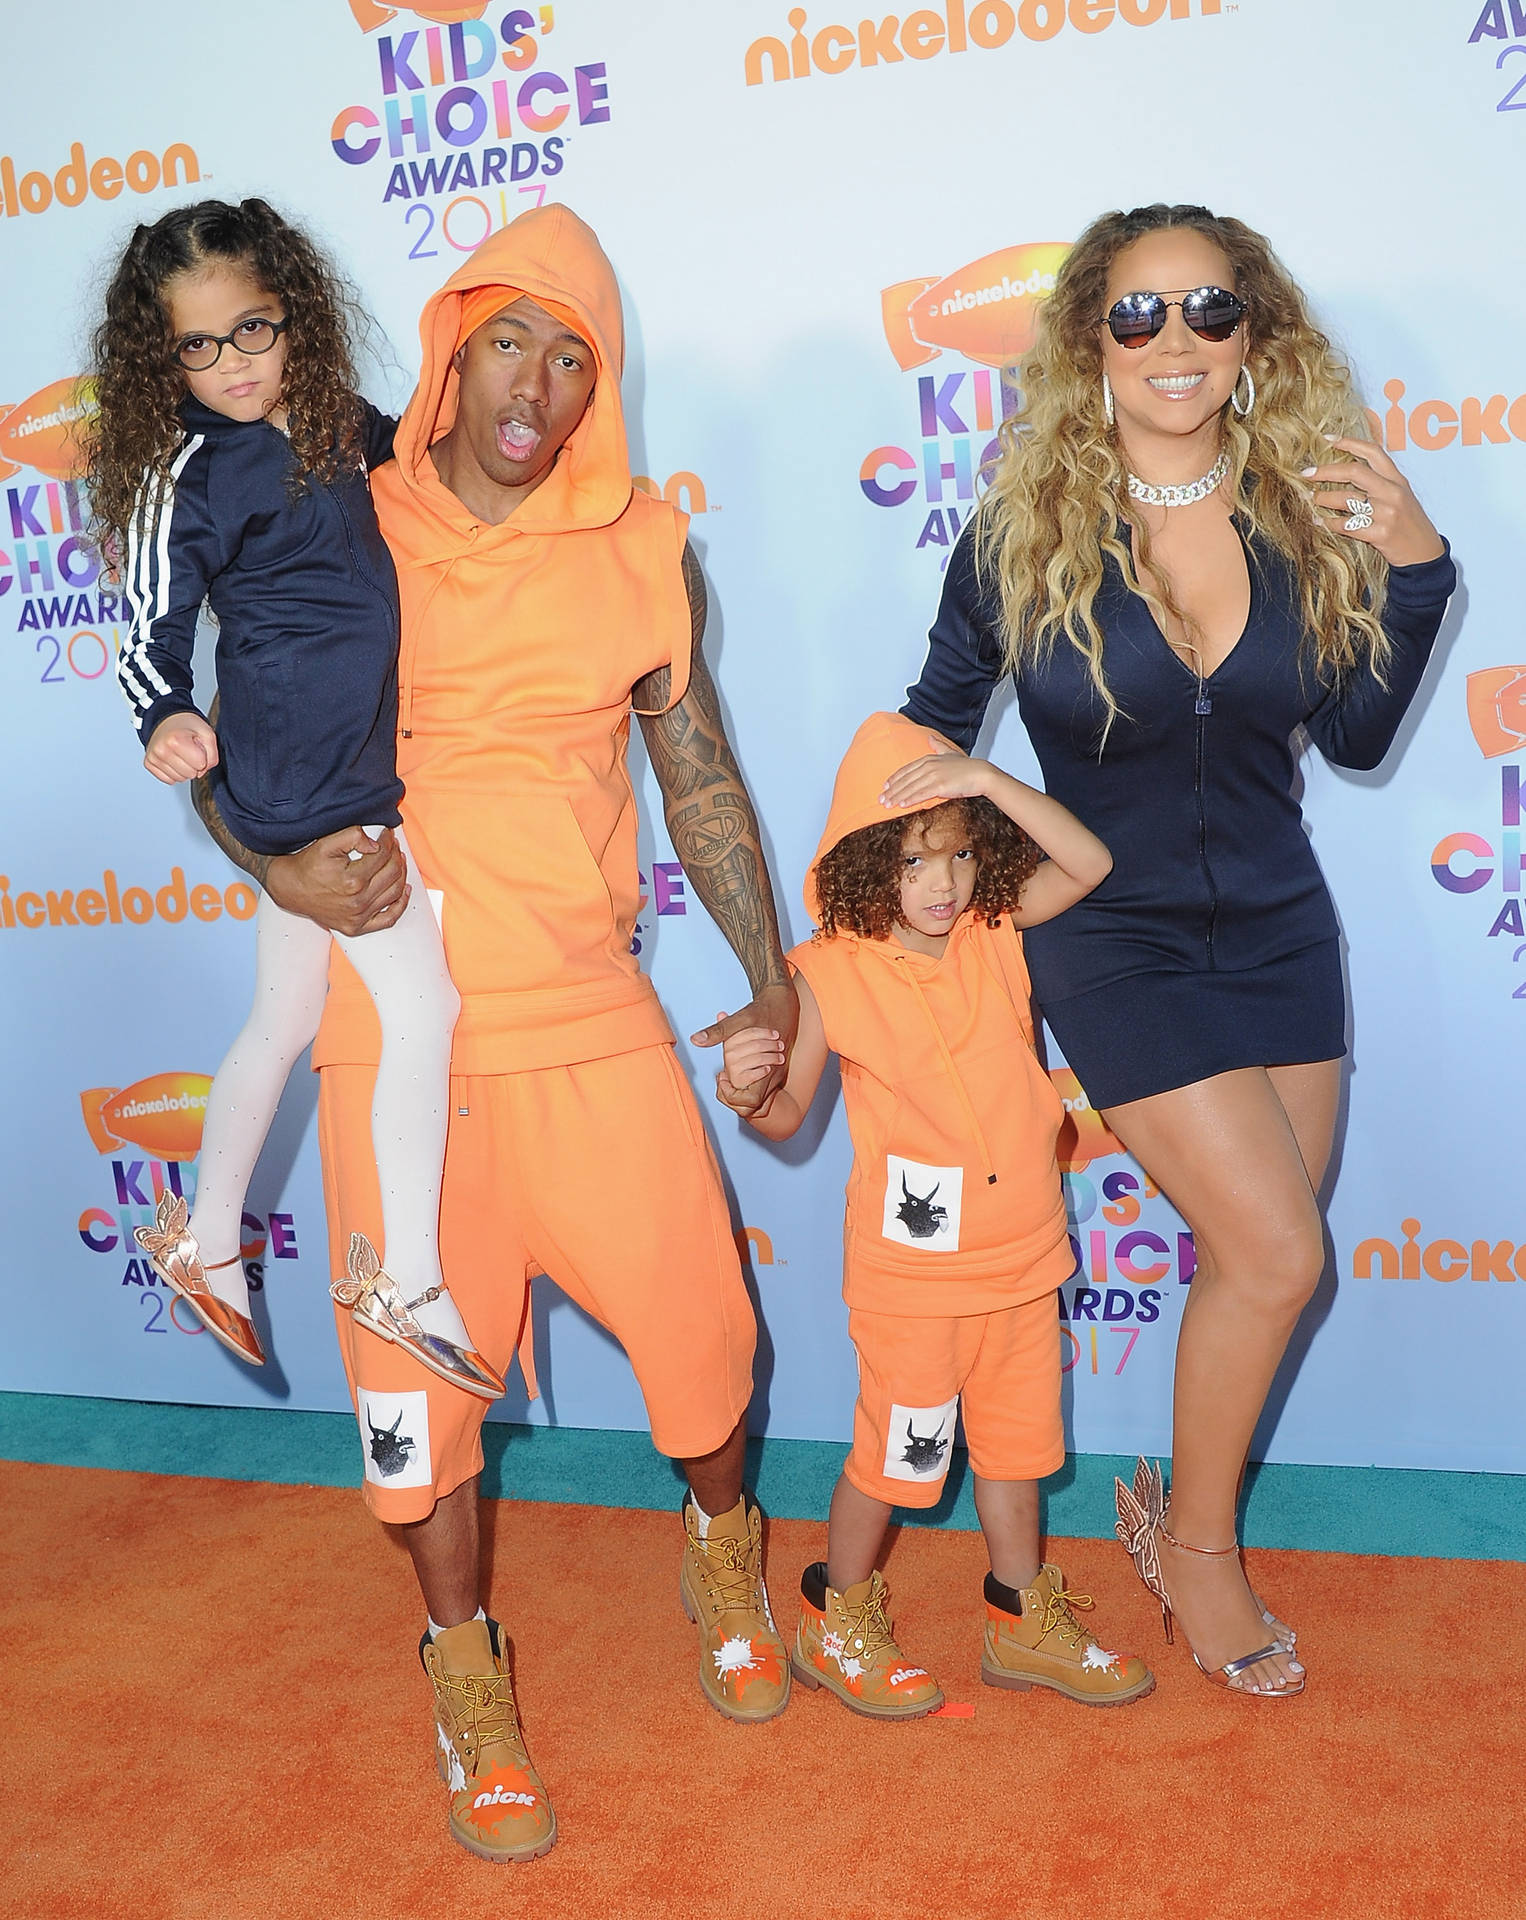 Nick Cannon During Nickelodeon Awards Background